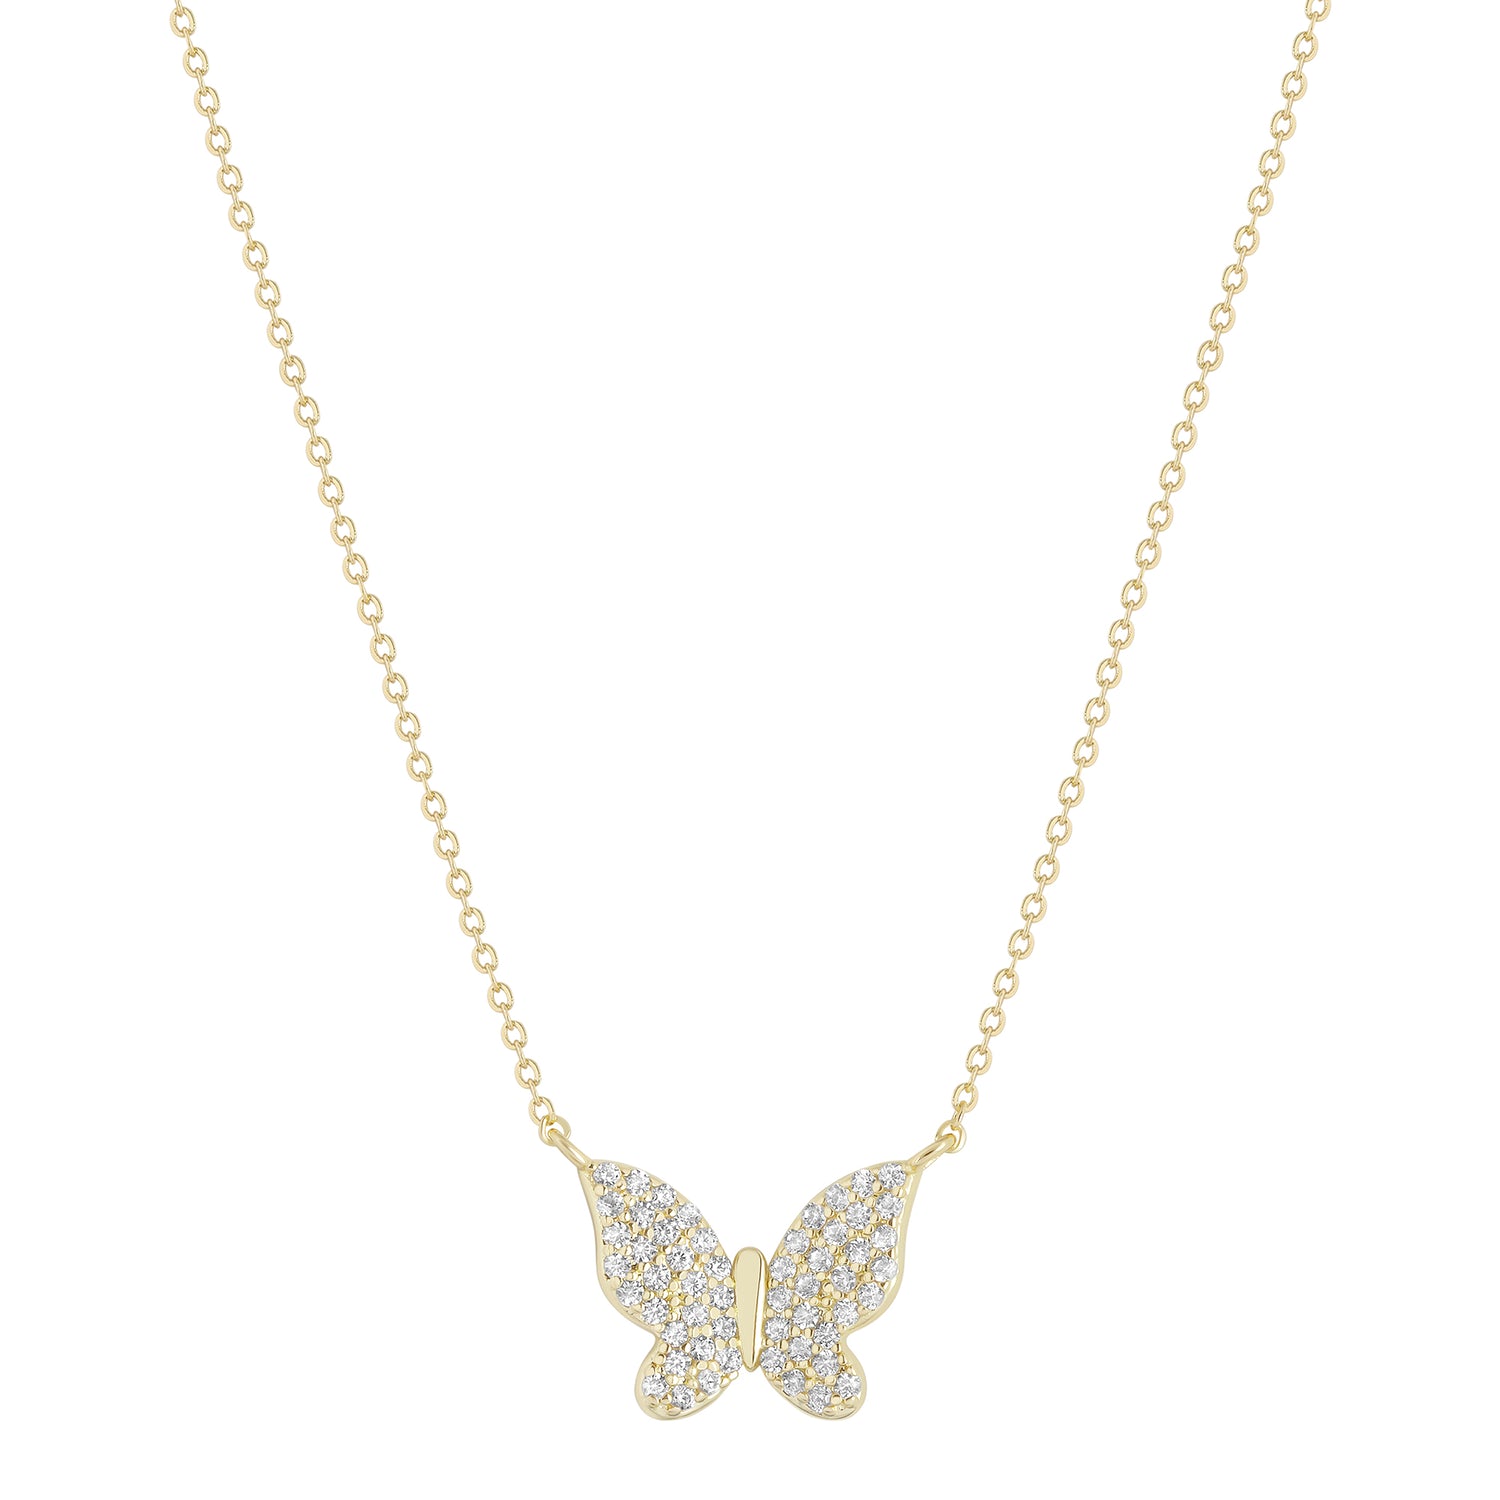 Social Butterfly Necklace Set of 2